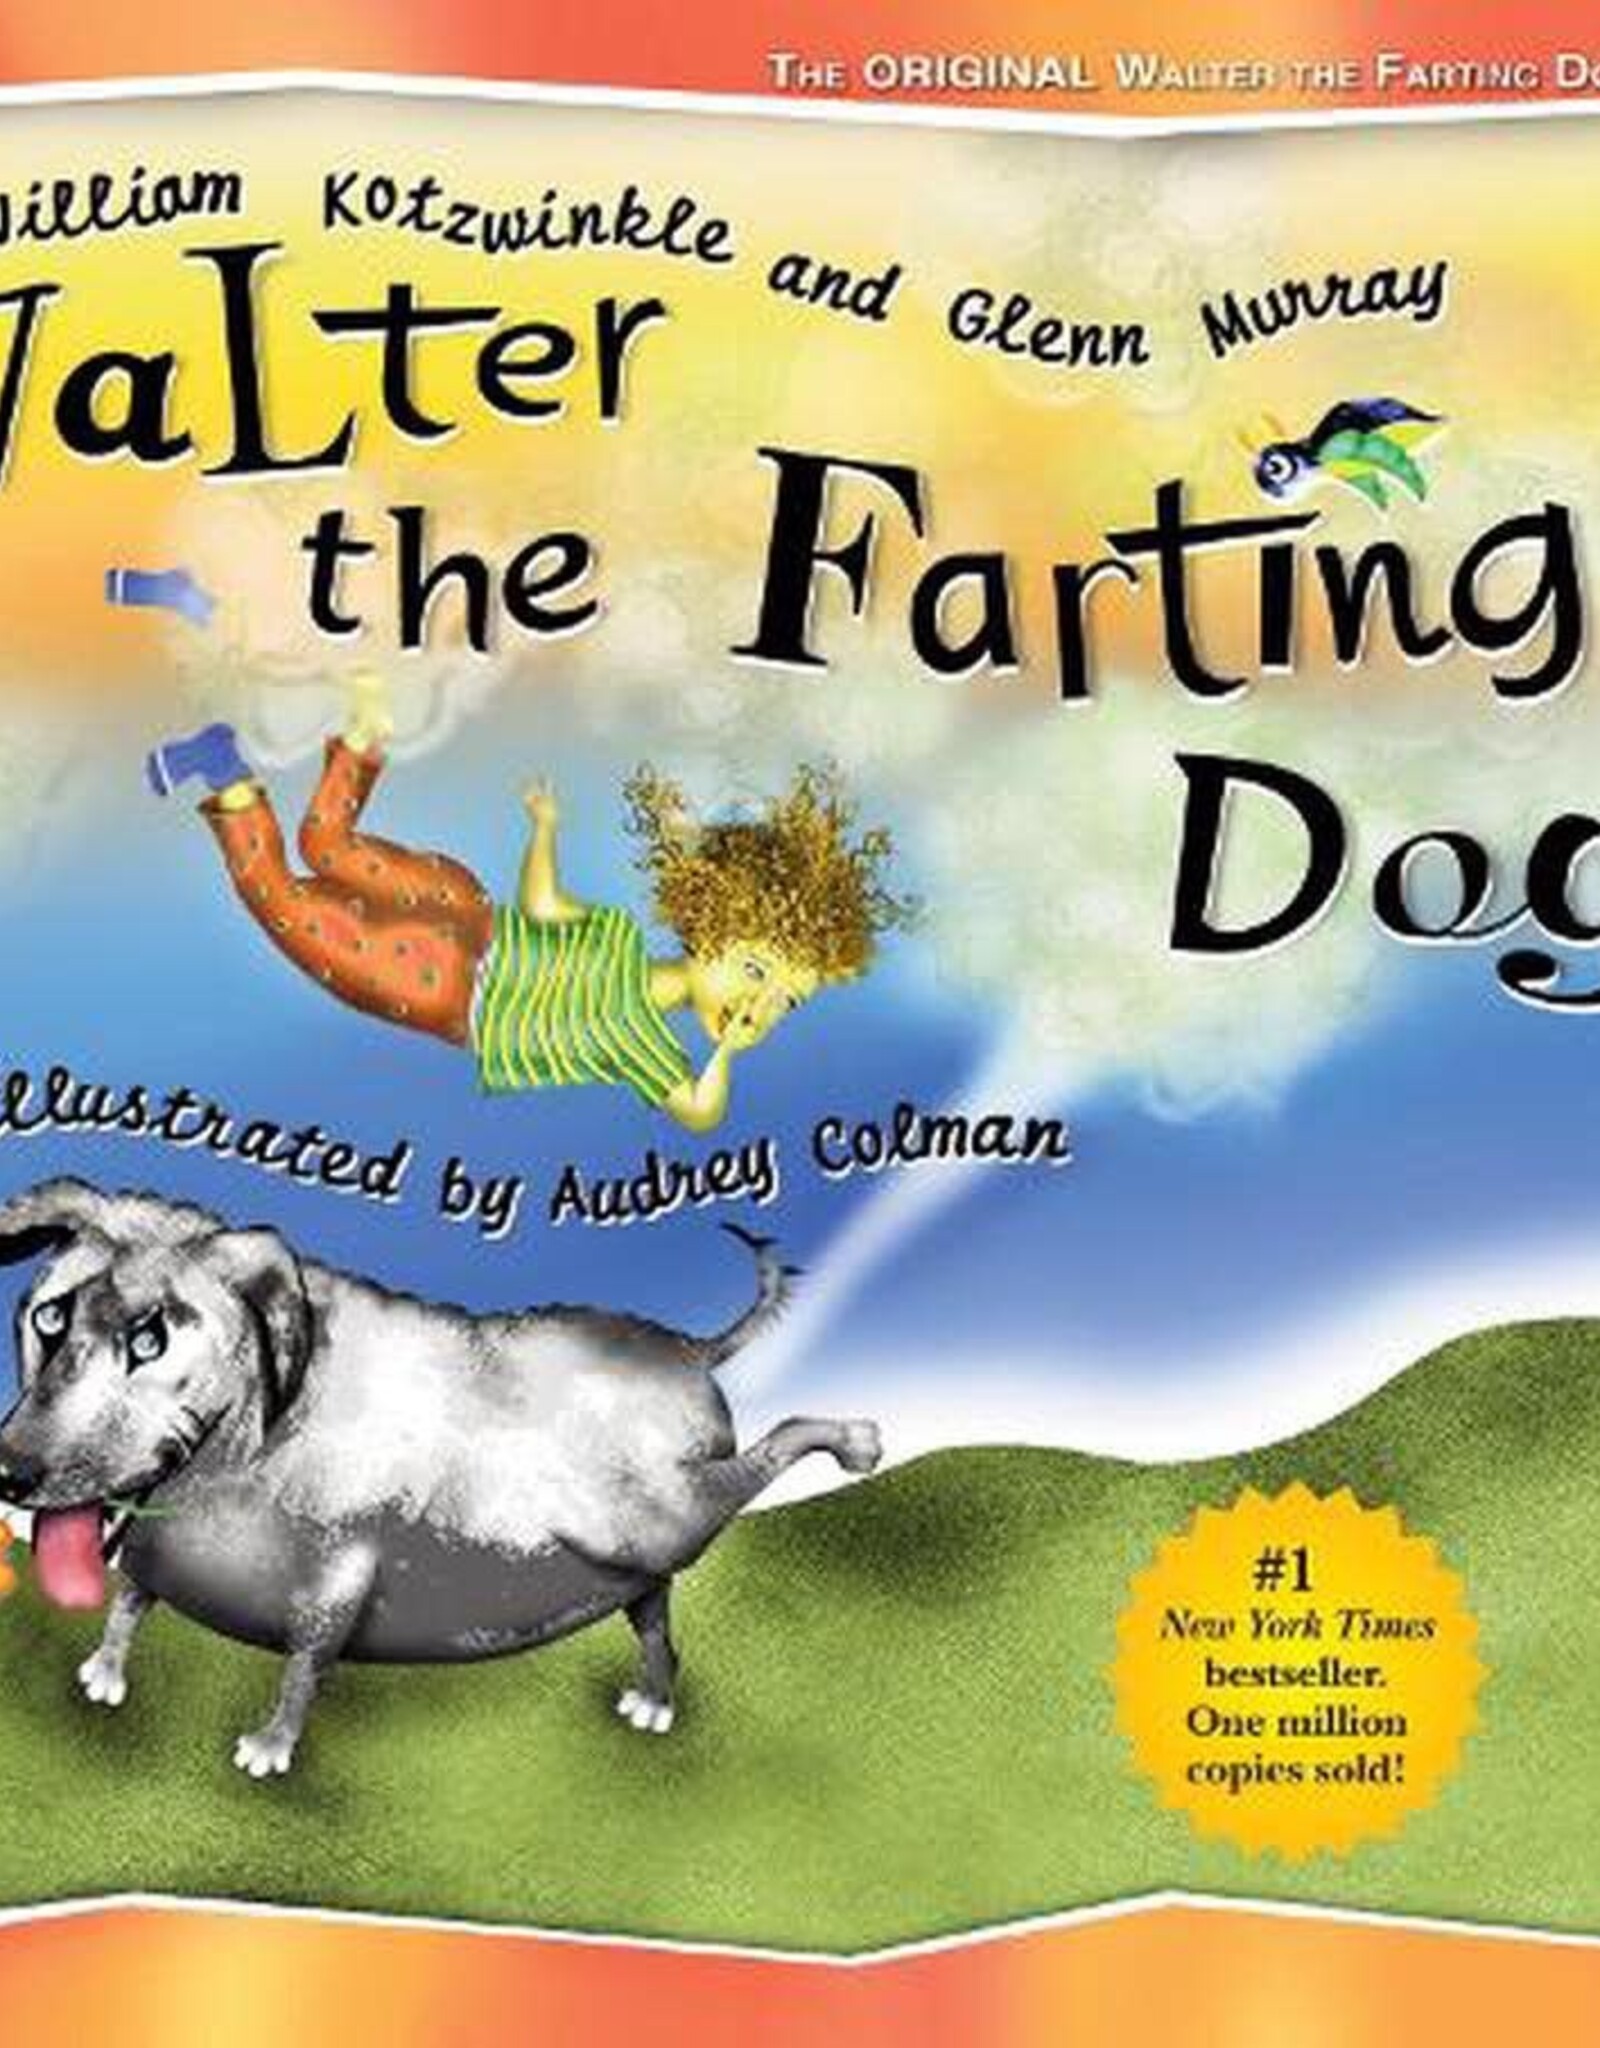 BOOK PUBLISHERS WALTER THE FARTING DOG